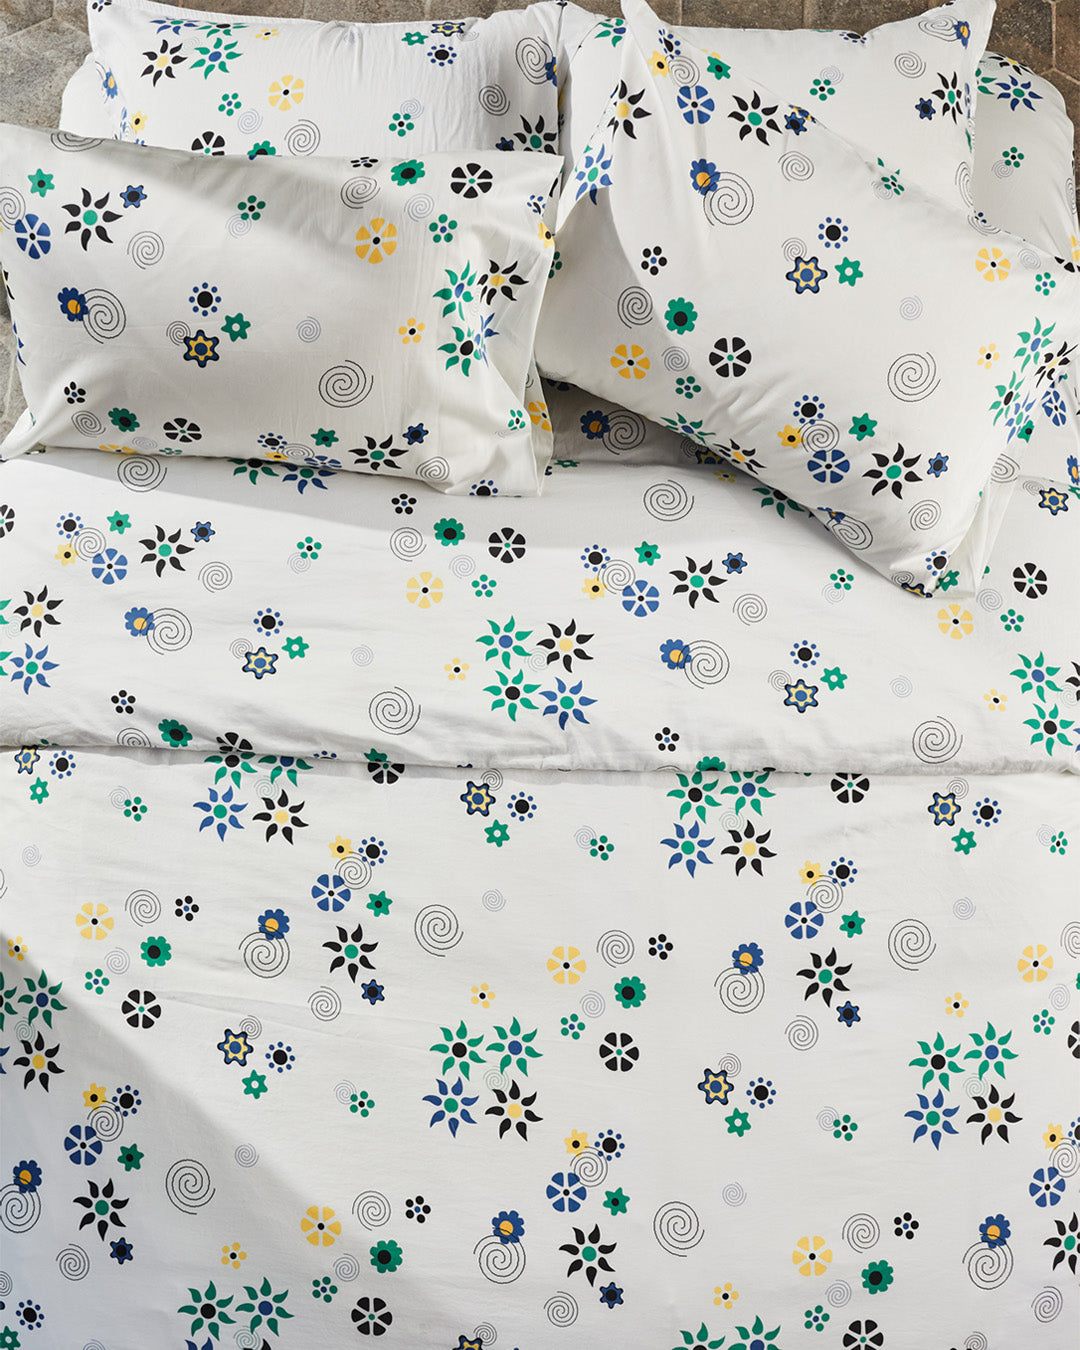 Dusen Dusen Duvet and Sheet Sets in multi-colored Flower print. Include an individual Flat Sheet to round out a Sheet Set. 100% cotton sateen, 300 thread count. Machine wash cold and tumble dry. Made in Portugal.   Our cotton sateen is smooth and cool to the touch, and features a slight lustrous finish. The sateen softens further with every wash;